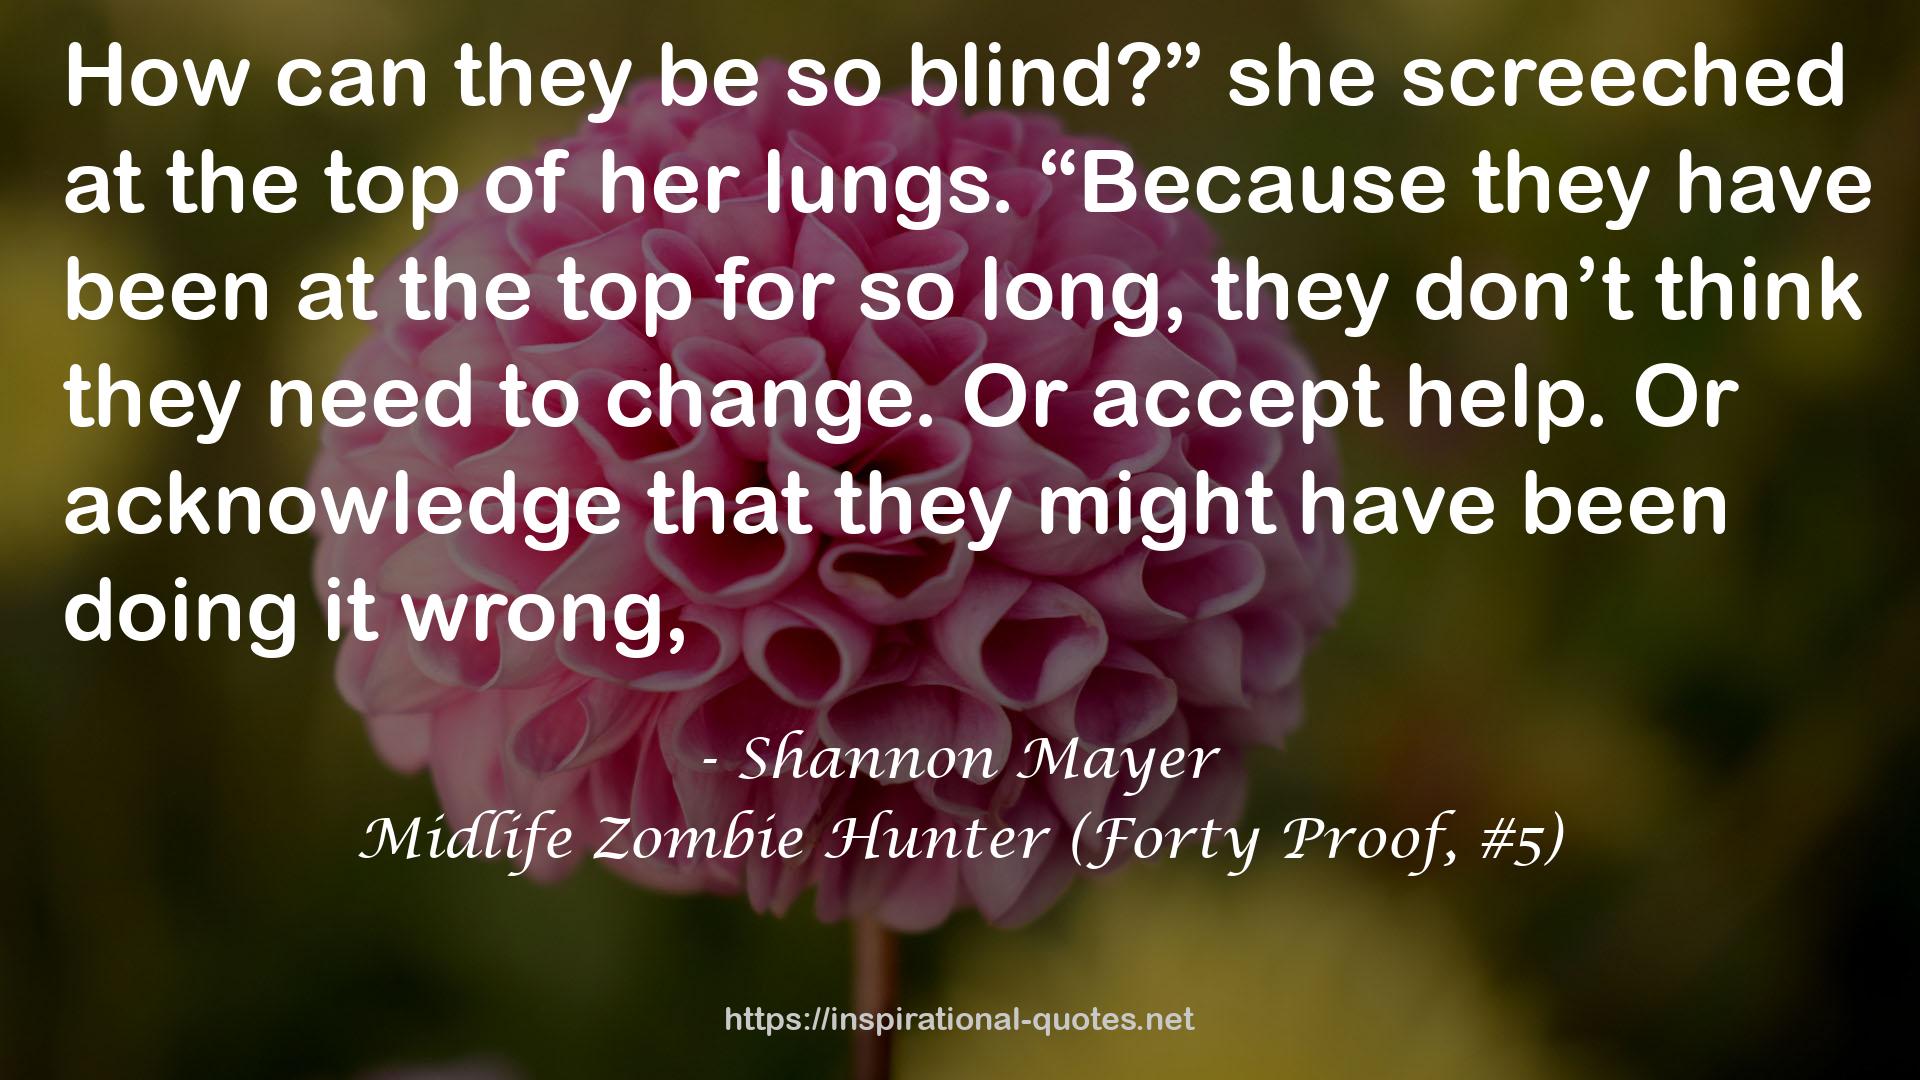 Midlife Zombie Hunter (Forty Proof, #5) QUOTES